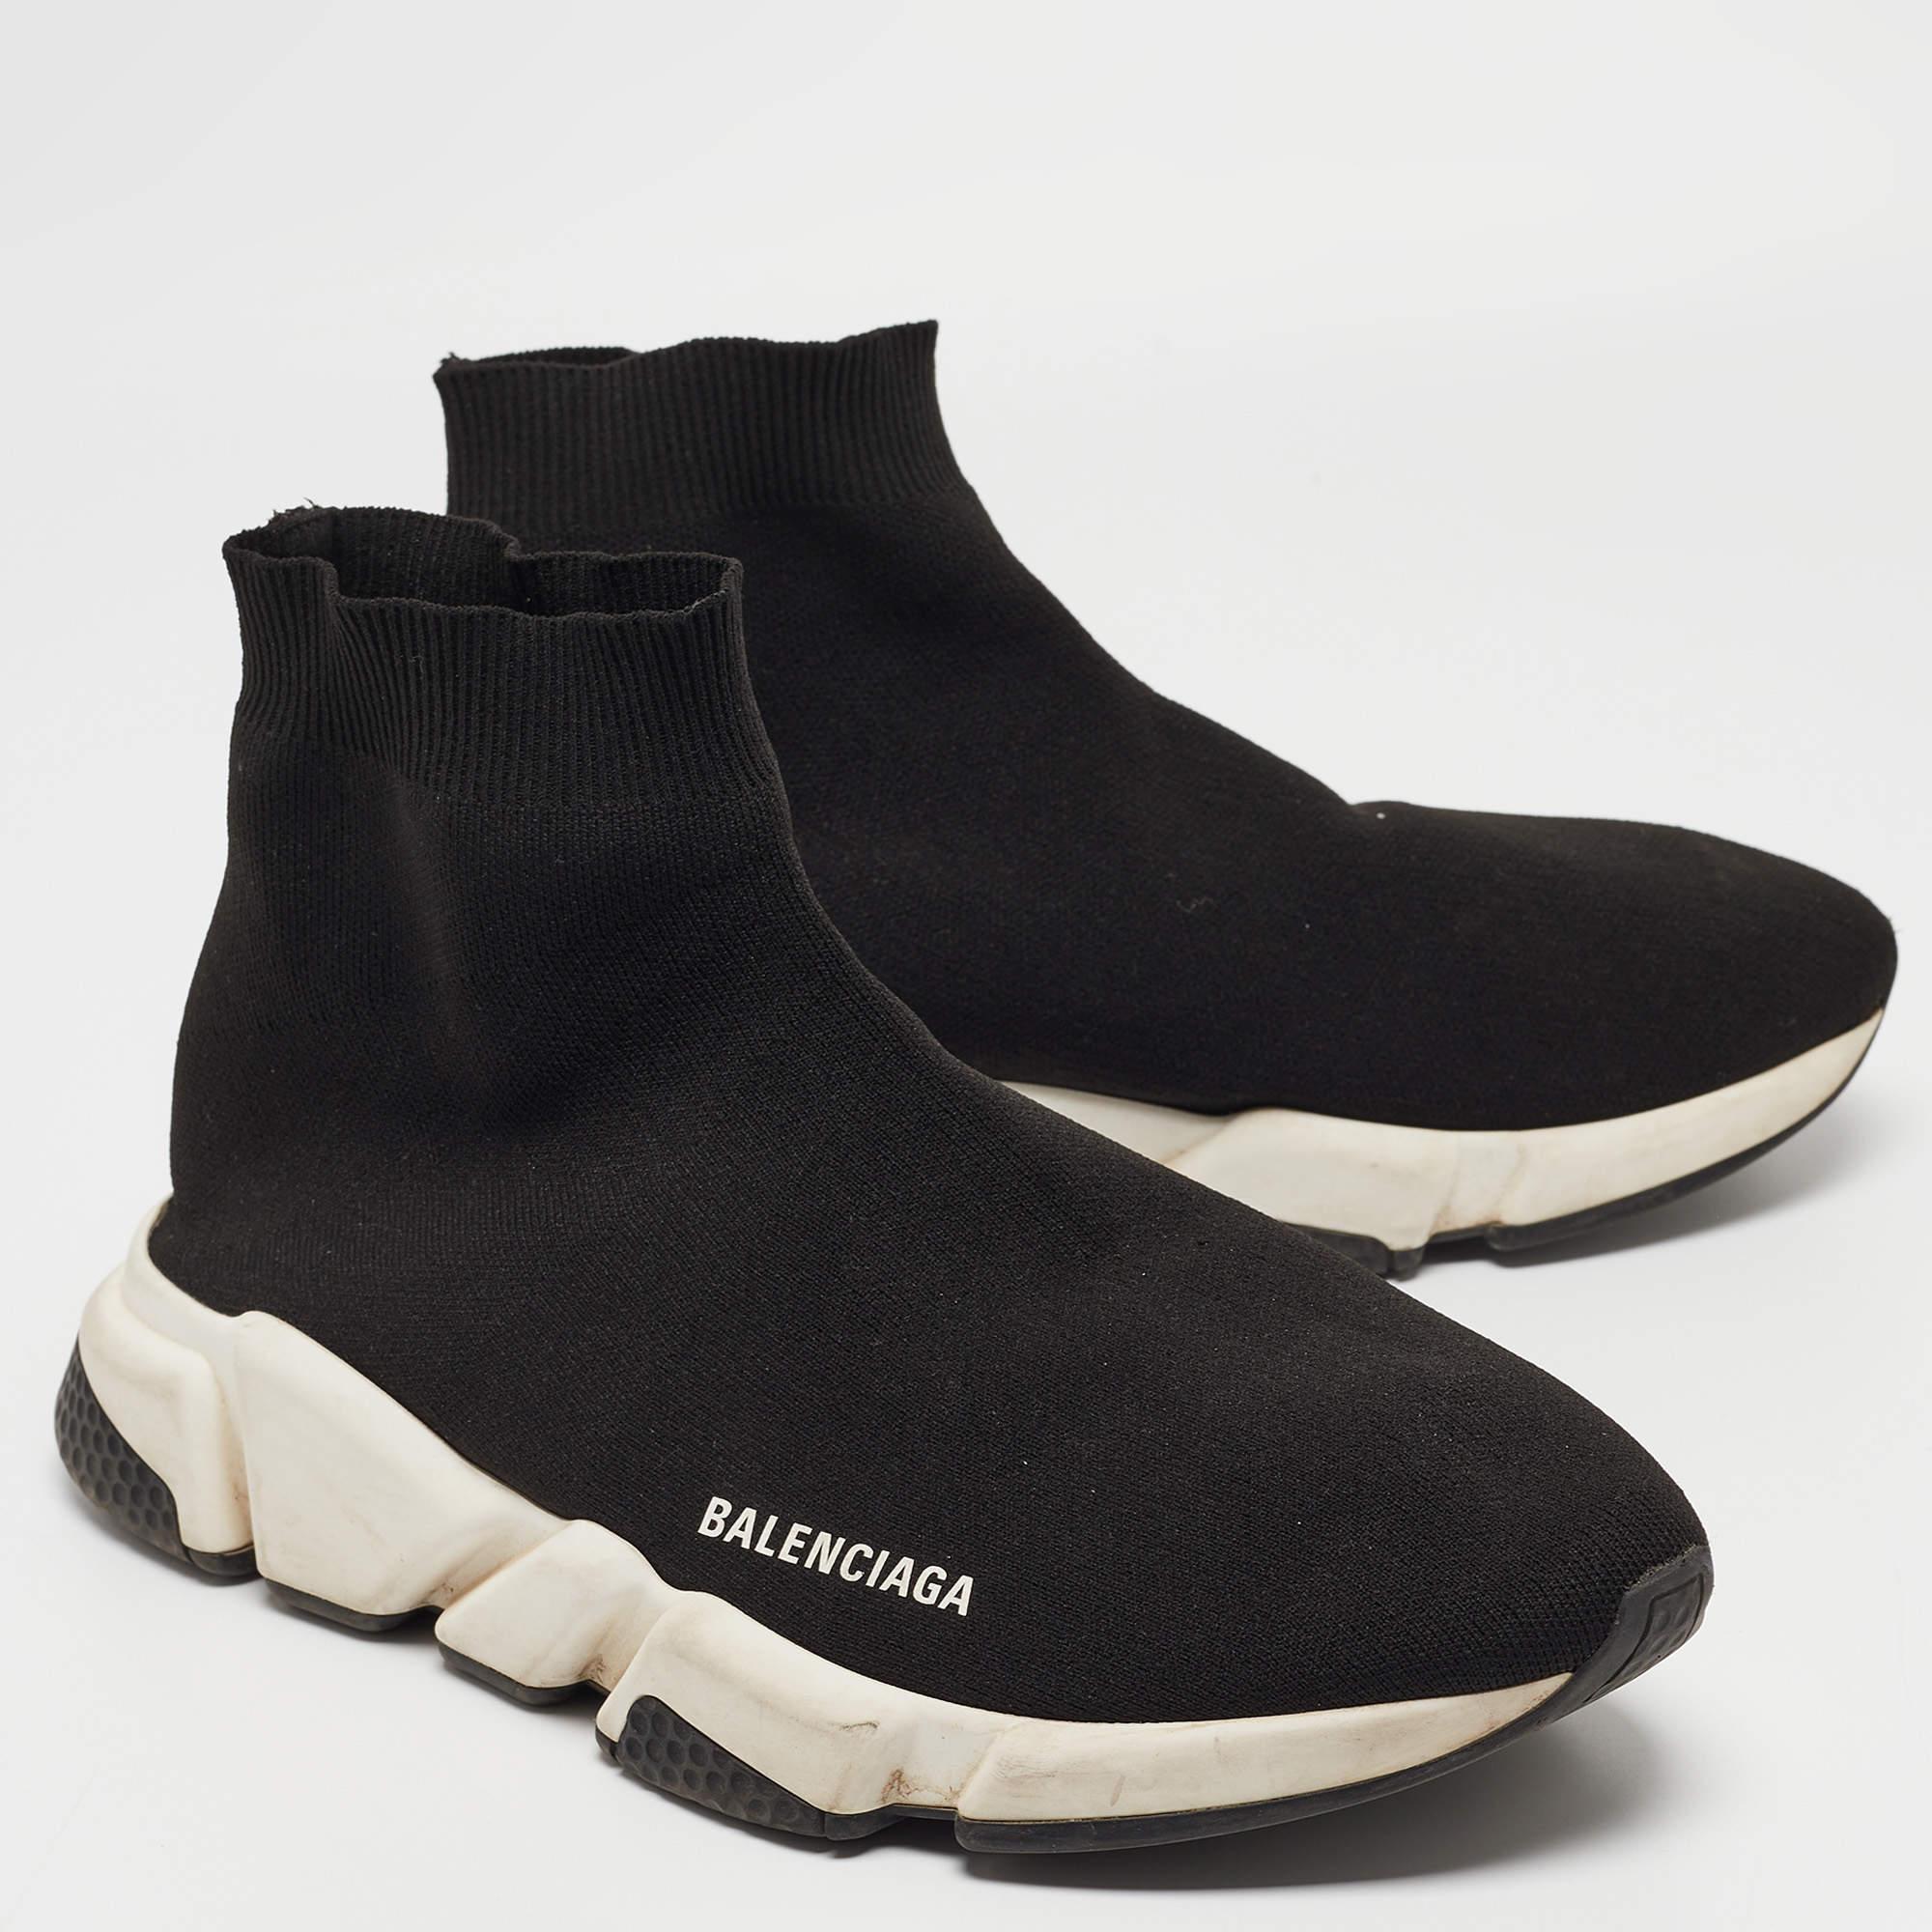 Balenciaga Black Knit Fabric Speed Trainer Sneakers Size 43 For Sale 3